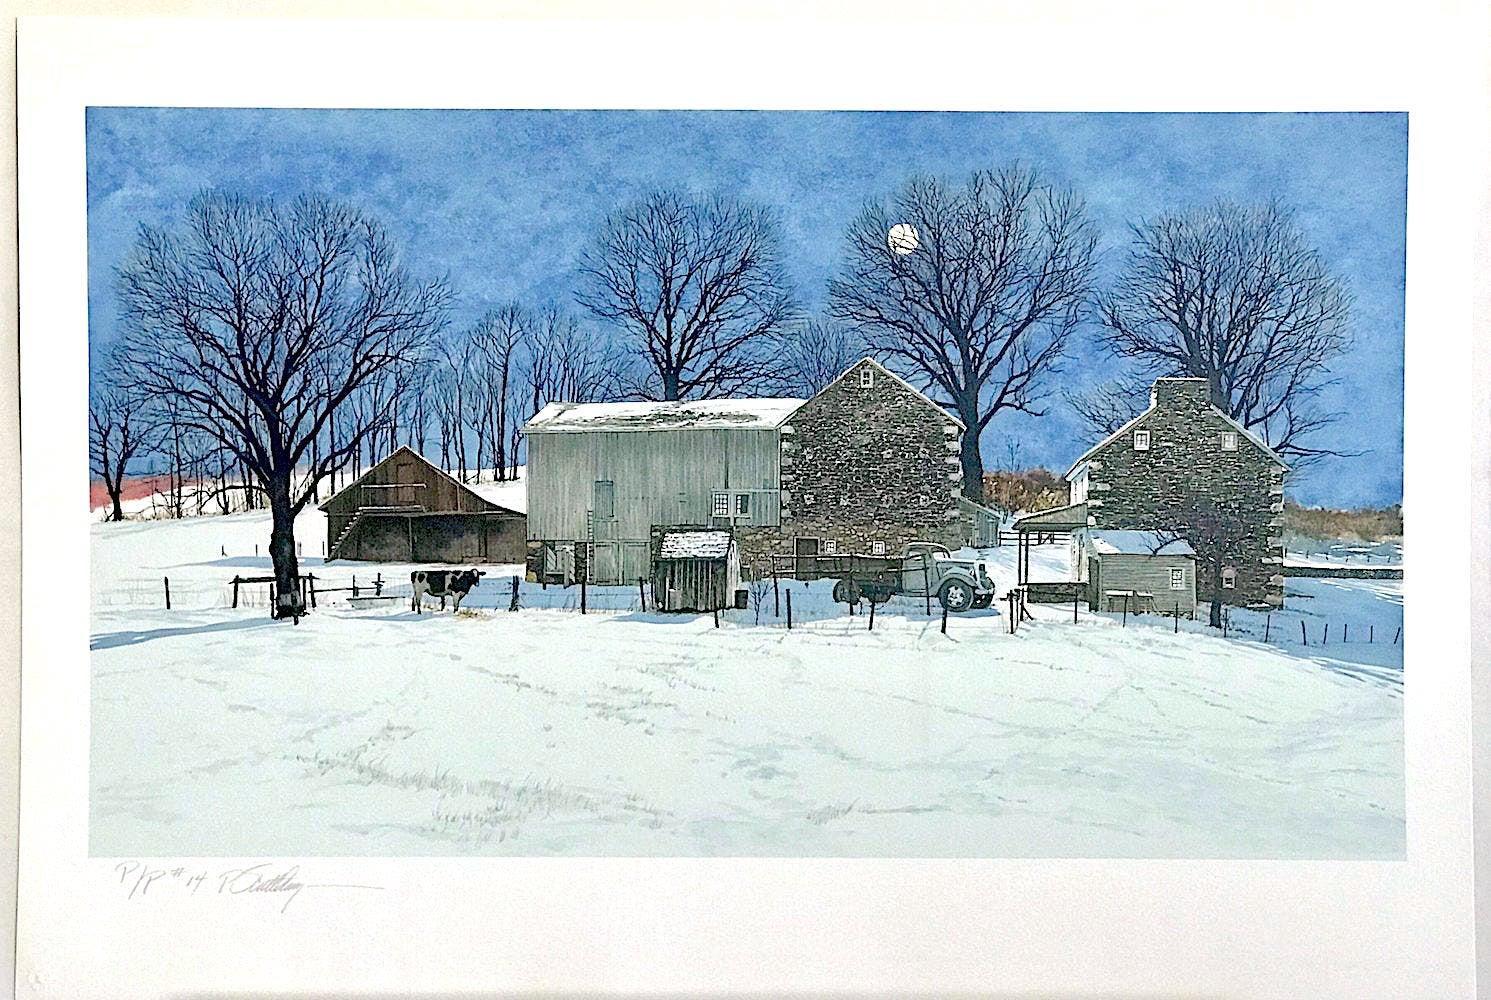 DOMINO Signed Lithograph, Bucks County Landscape, Historic Stone Farmhouse, Cow - Blue Landscape Print by Peter Sculthorpe